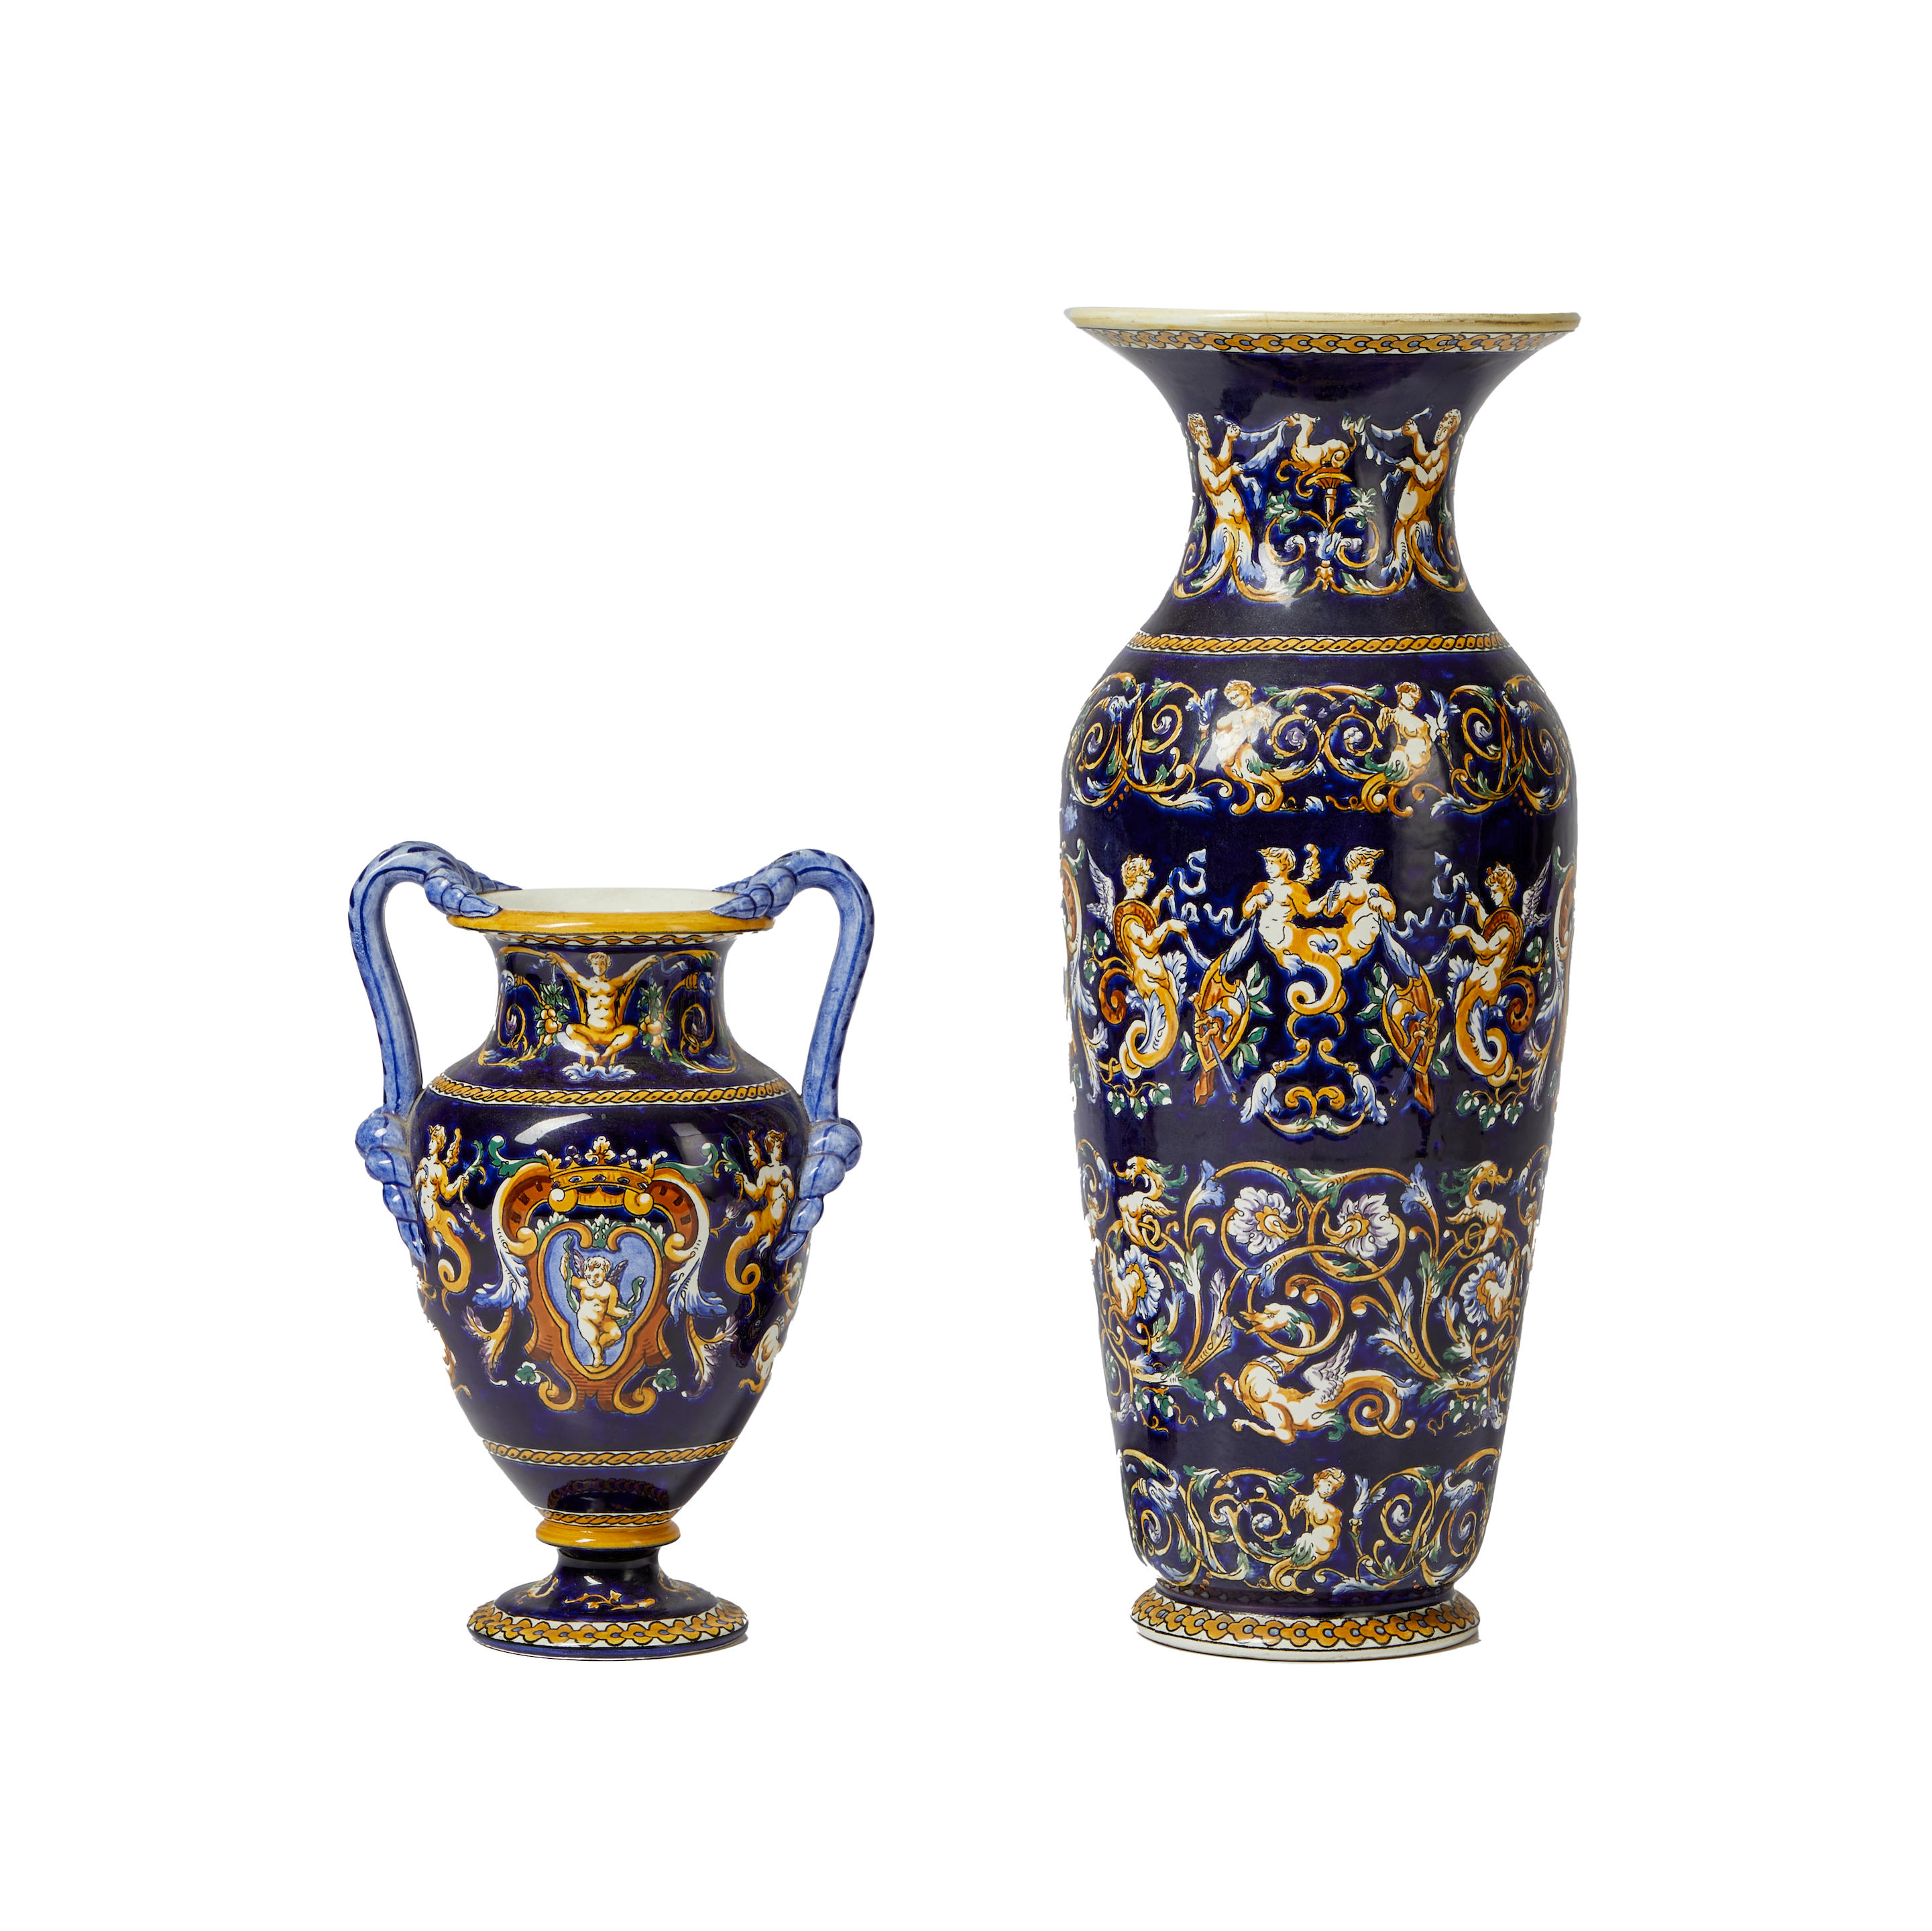 TWO FRENCH GIEN VASES one urn form 3ae7a6